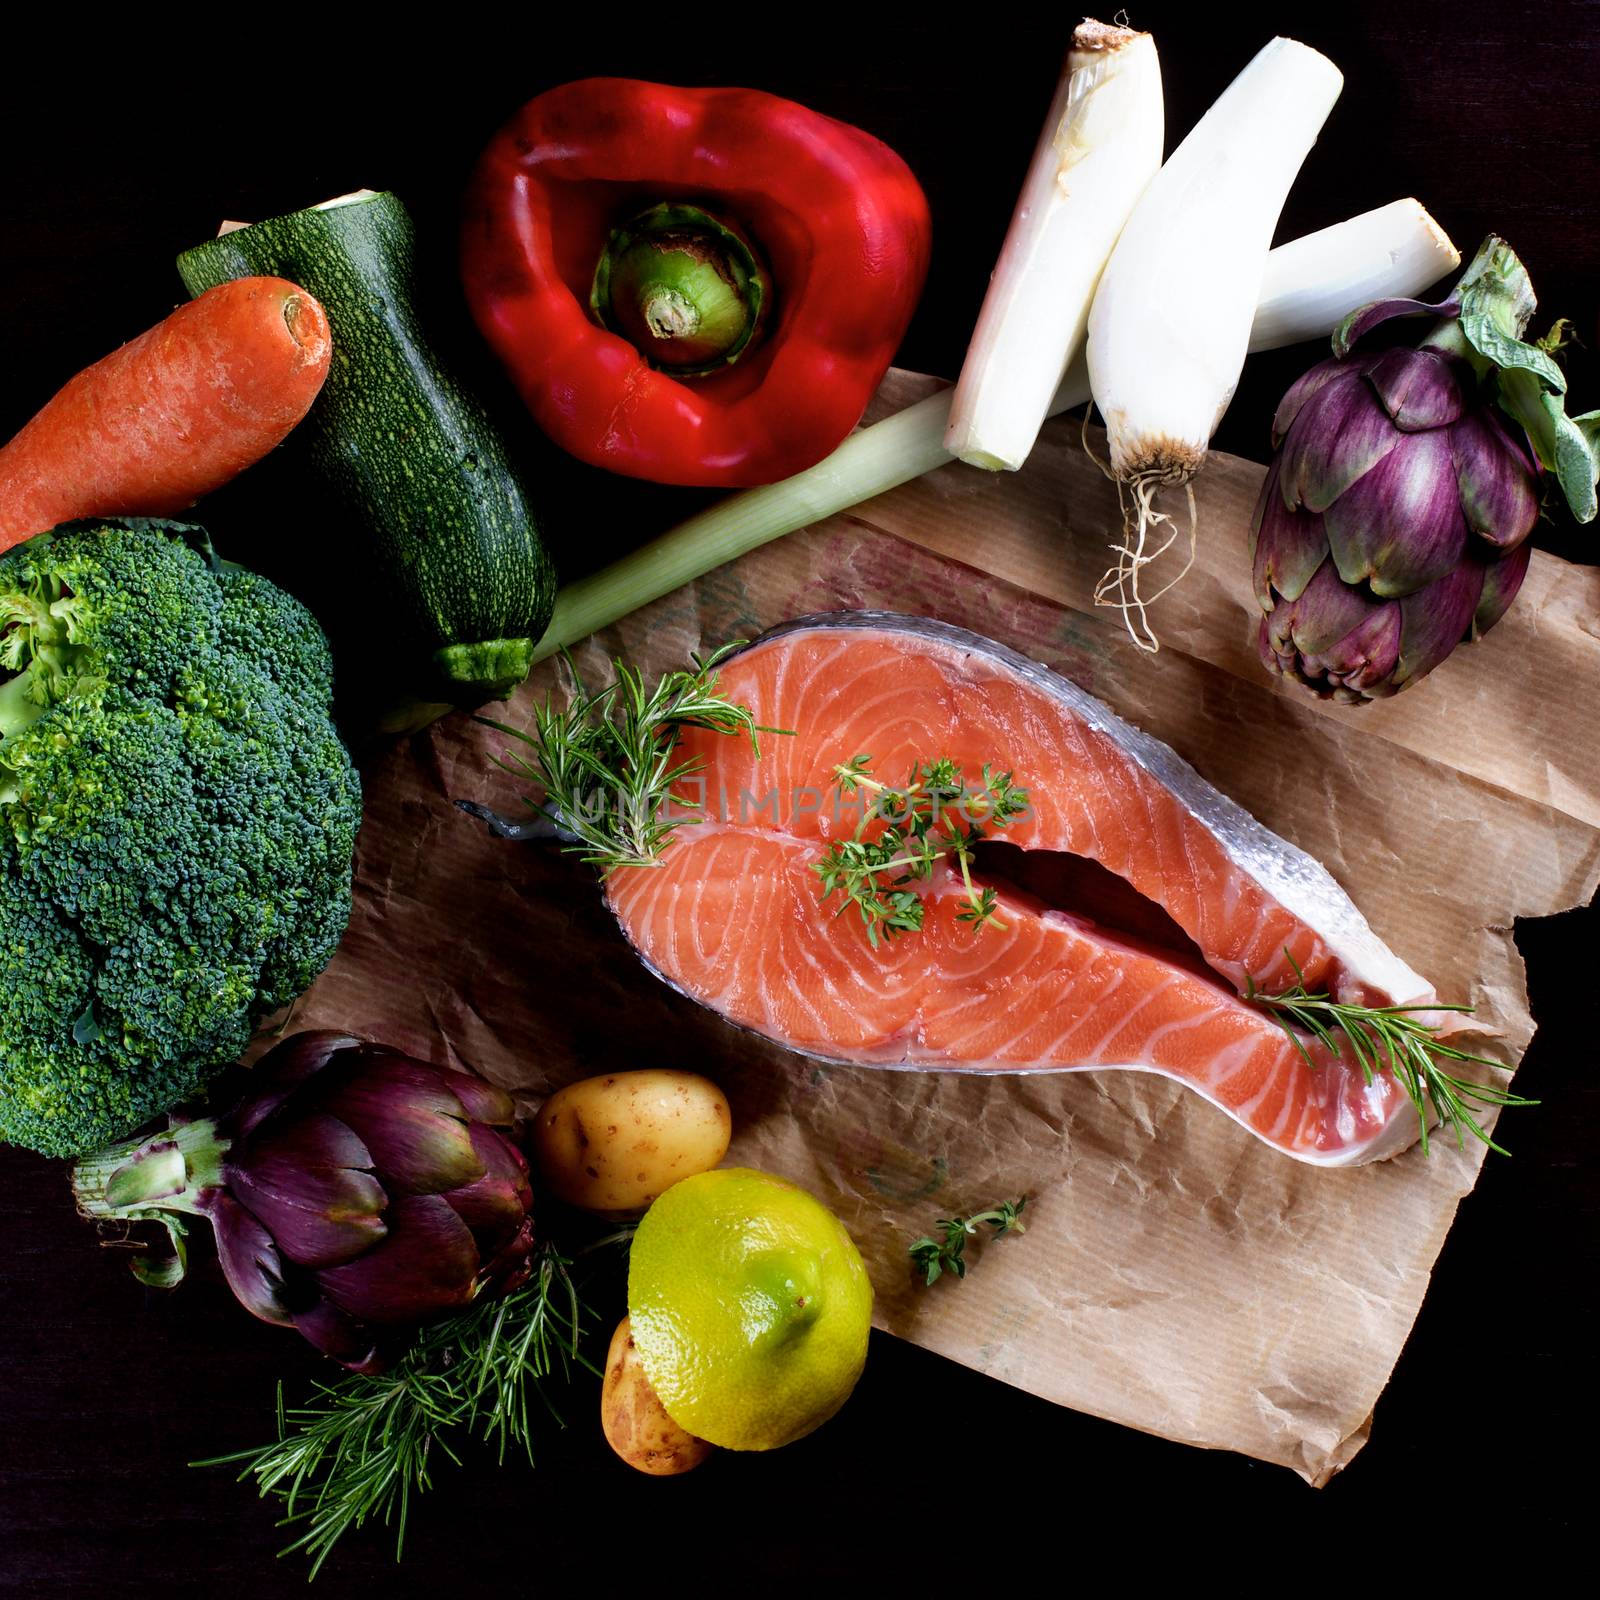 Raw Steak of Salmon and Heap of Raw Vegetables with Broccoli, Artichokes, Spring Onion, Potato, Red Bell Pepper and Lemon closeup on Parchment Paper. Top View on Dark Wooden background